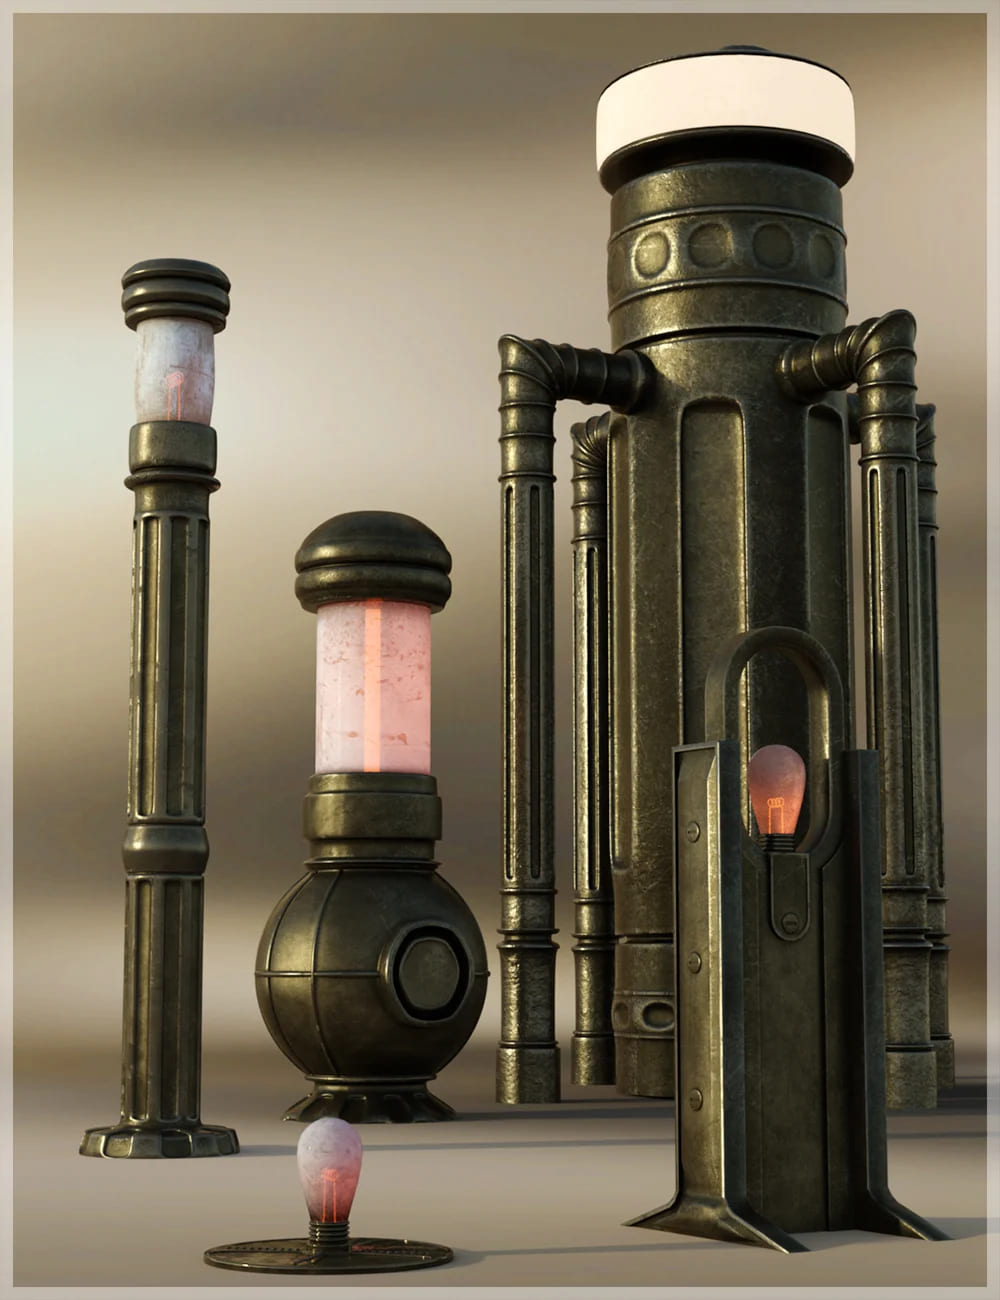 ND Steamy Deco: The Lamps_DAZ3D下载站